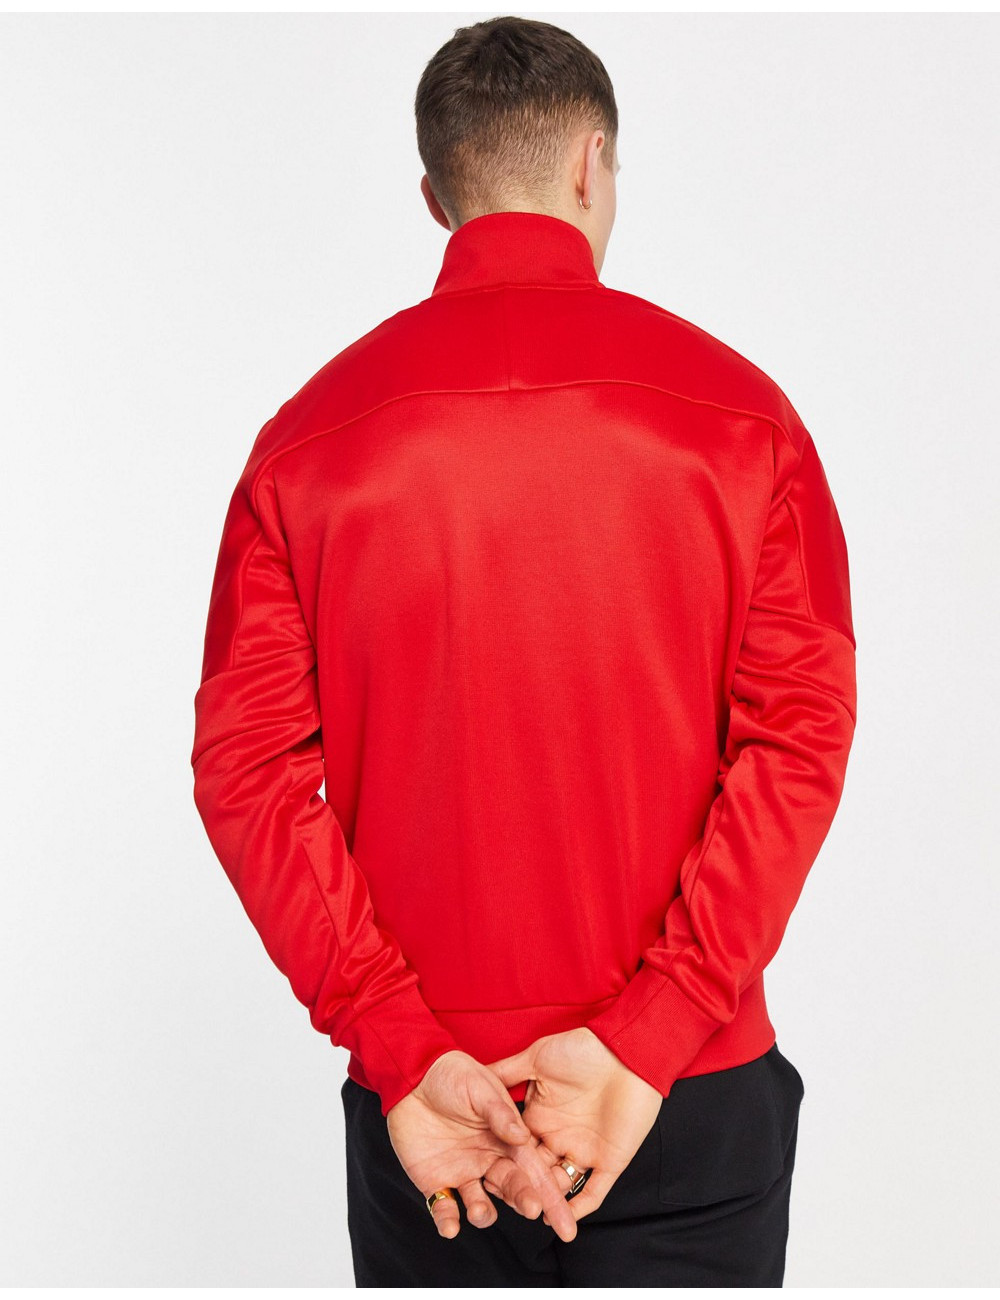 Puma SF T7 track jacket in red